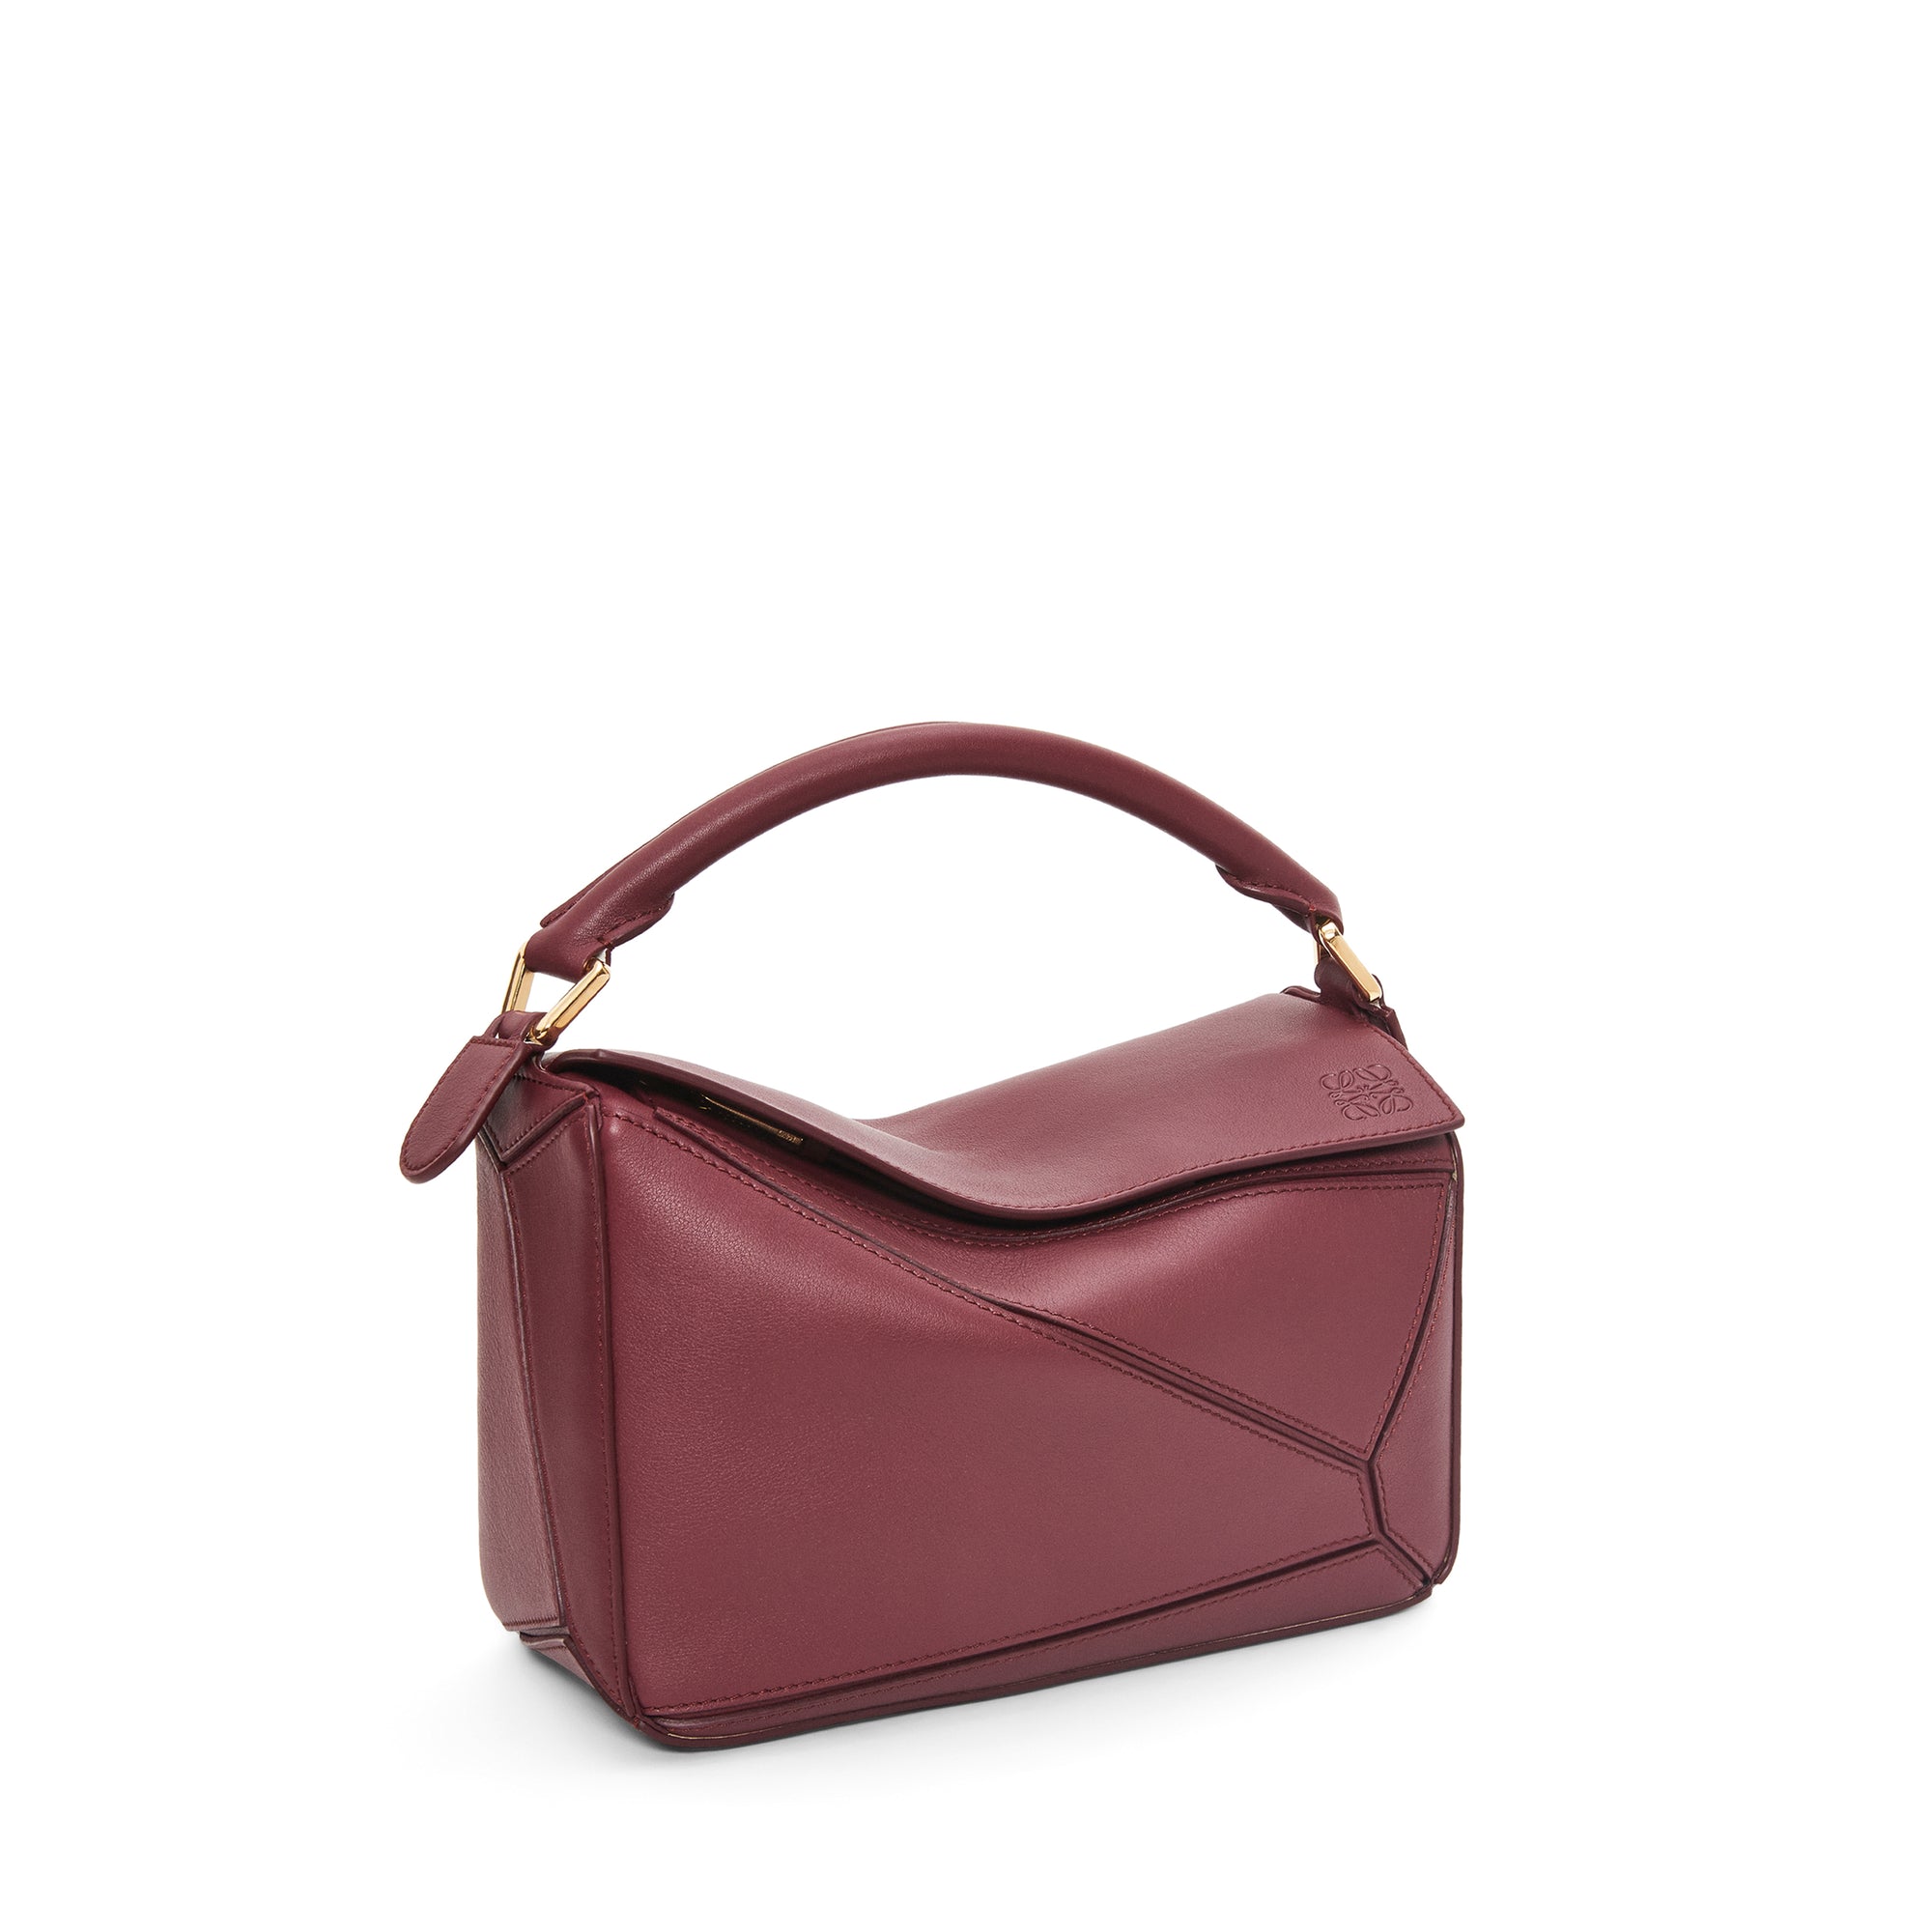 Loewe - Women’s Puzzle Small Bag - (Wild Berry) view 4